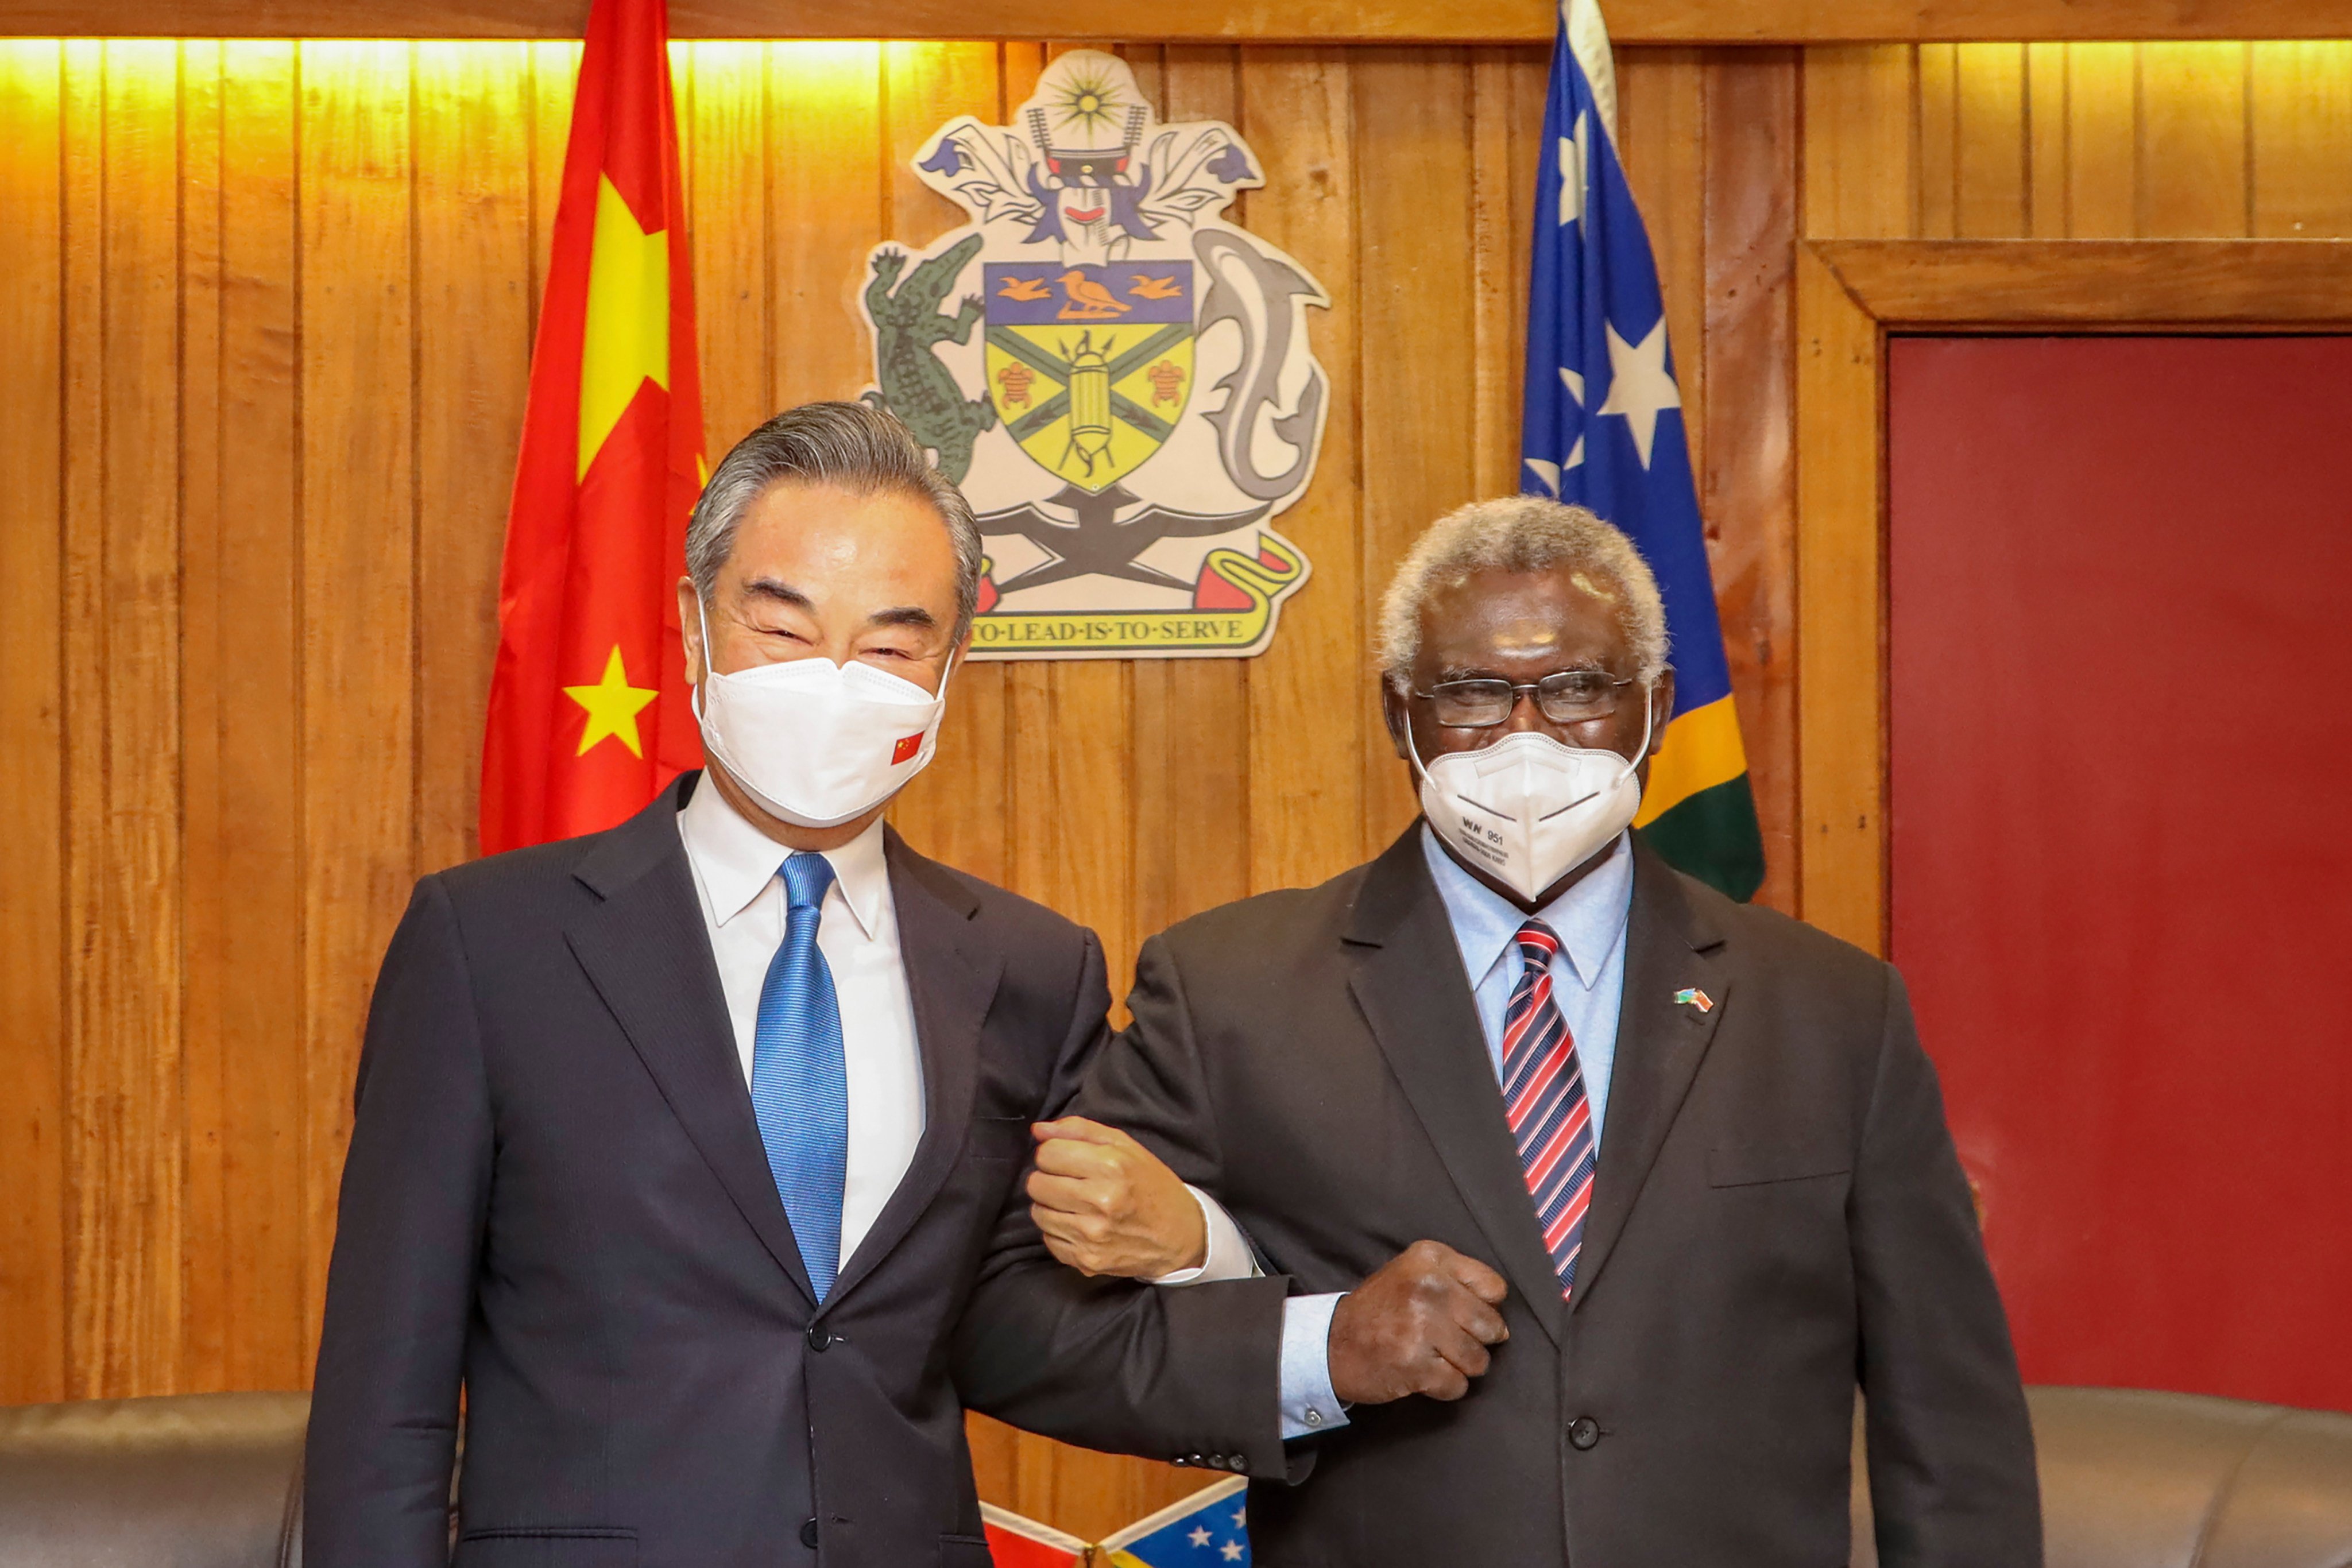 Solomon Islands Prime Minister Manasseh Sogavare, right, locks arms with visiting Chinese Foreign Minister Wang Yi in Honiara earlier this year. Photo: Xinhua